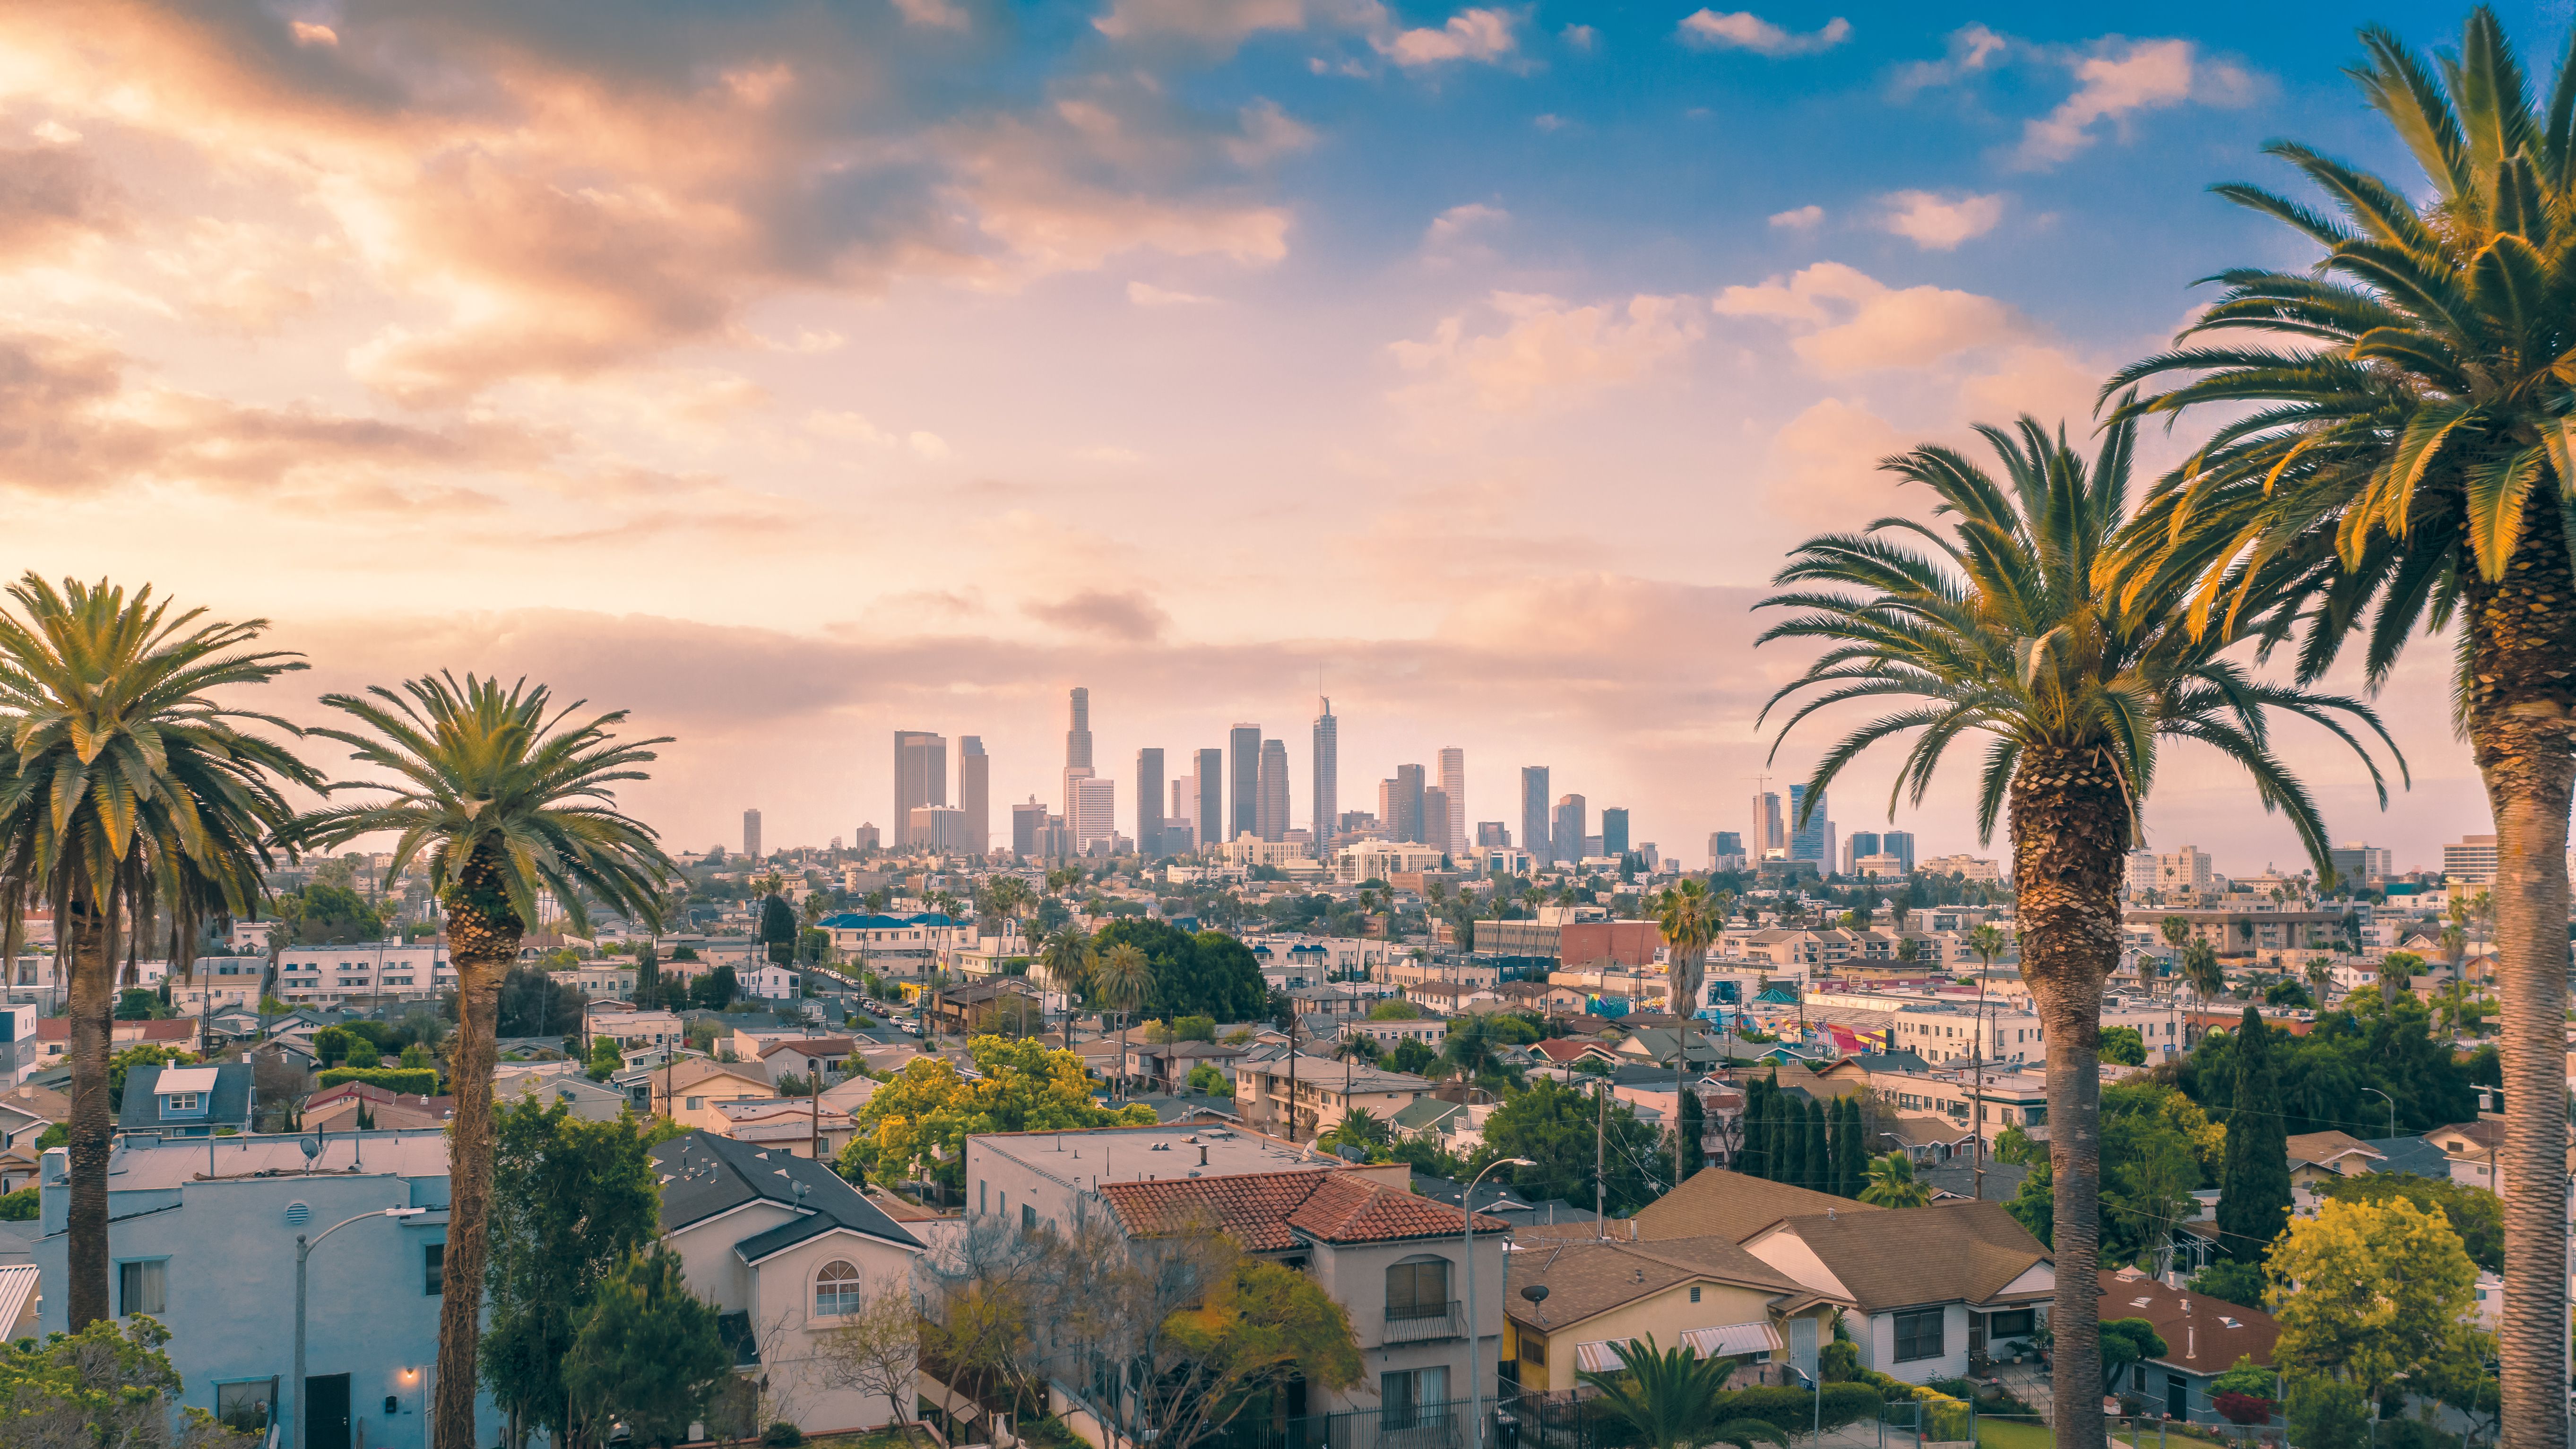 The Los Angeles cityscape with palm trees and buildings amid a hazy sunset/sunrise sky